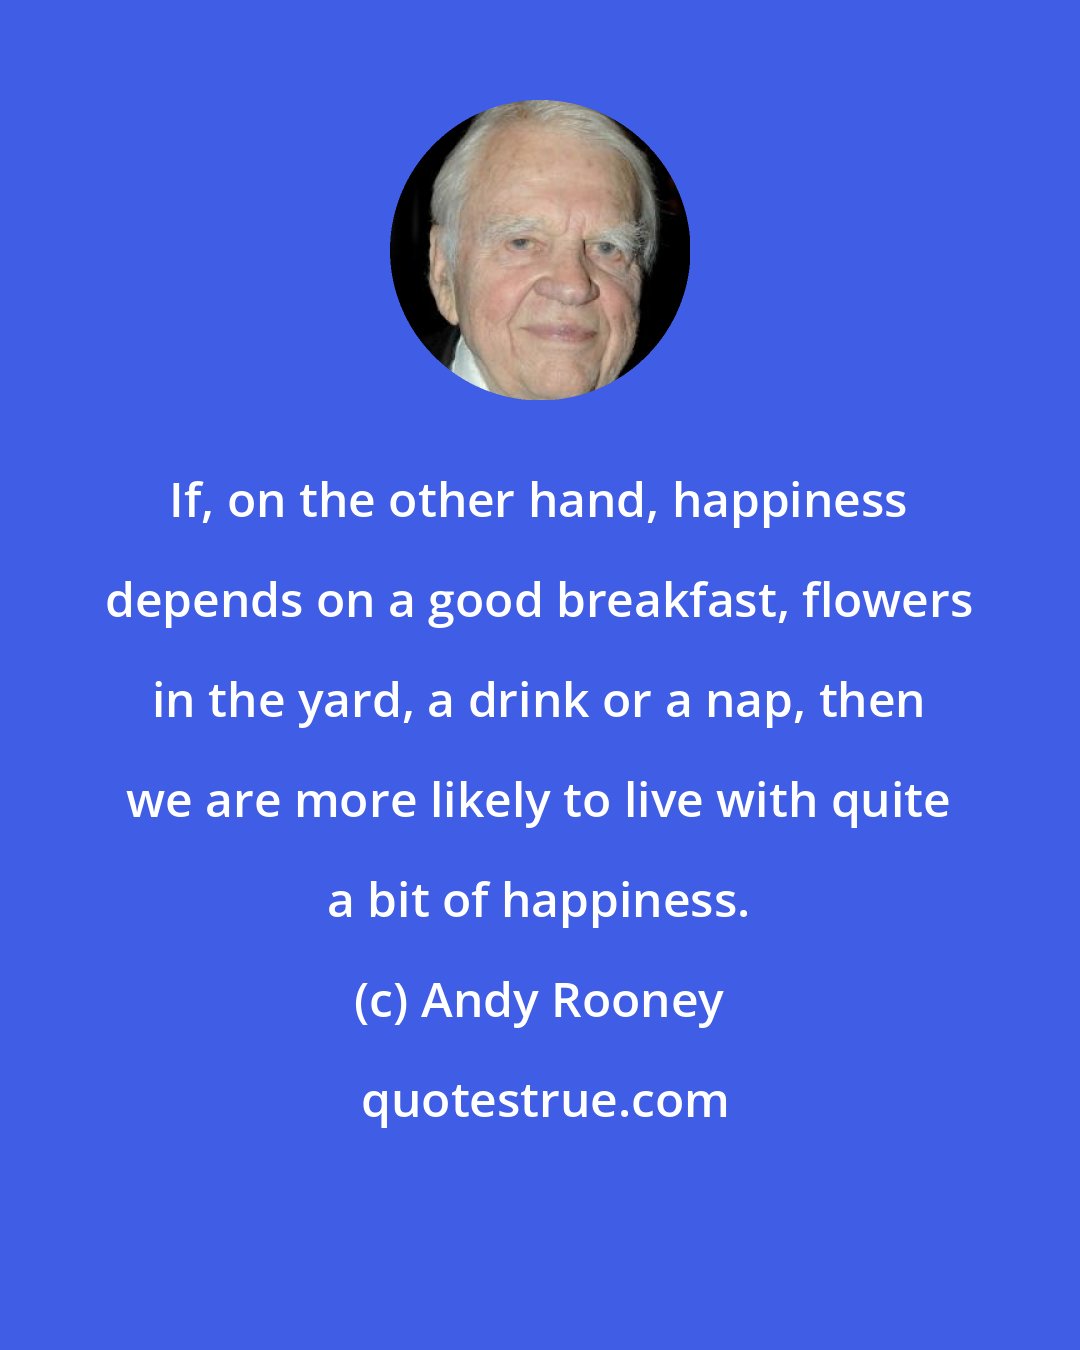 Andy Rooney: If, on the other hand, happiness depends on a good breakfast, flowers in the yard, a drink or a nap, then we are more likely to live with quite a bit of happiness.